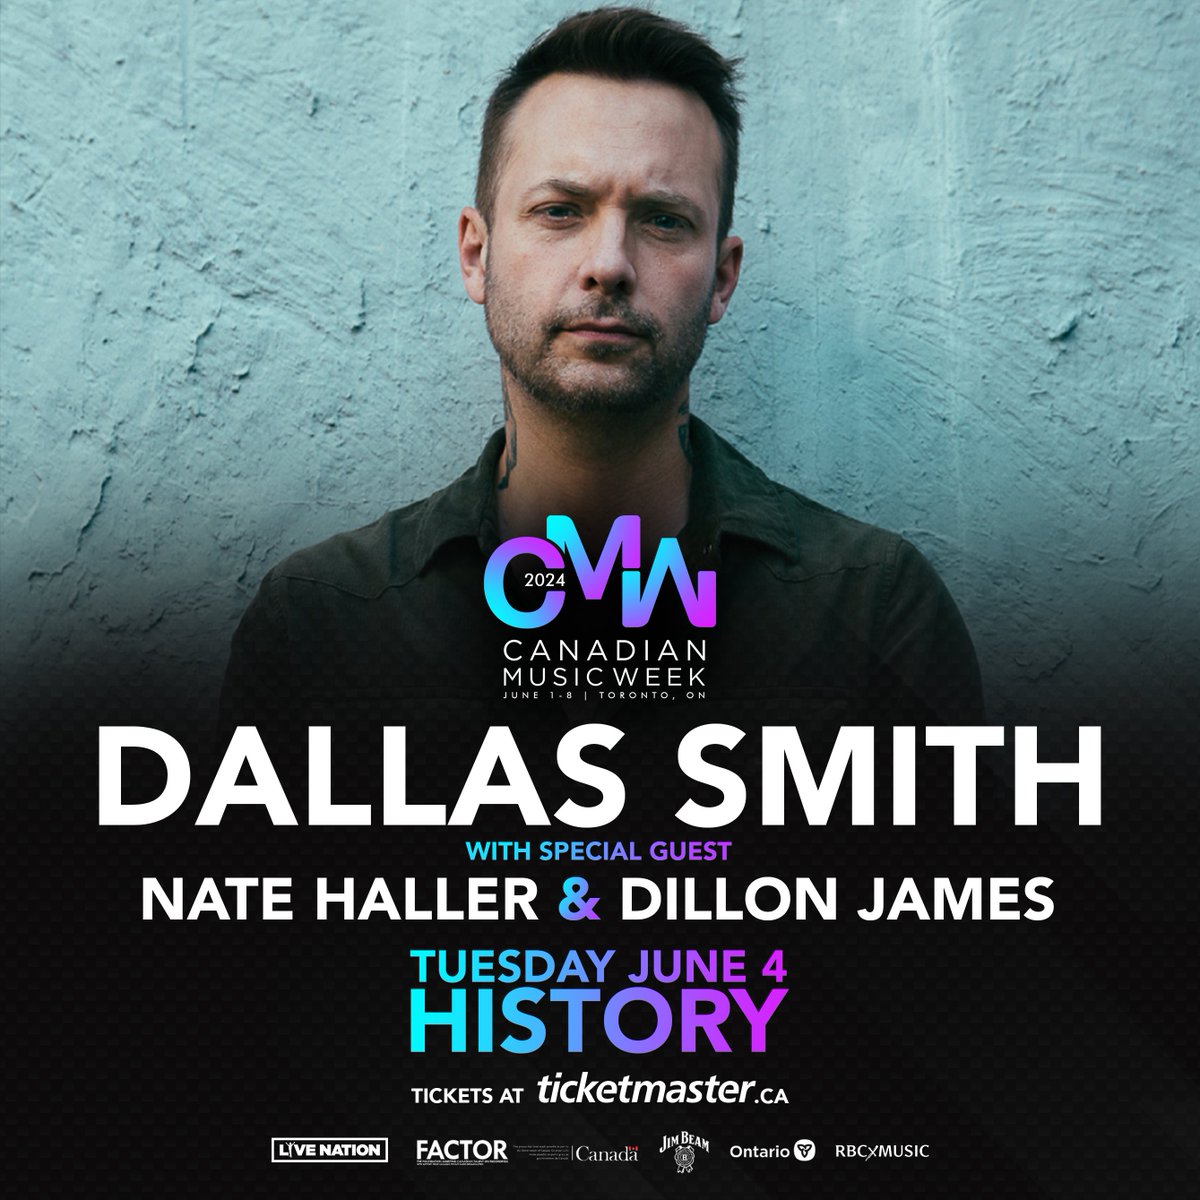 Excited to announce Dillon James joins Dallas Smith and Nate Haller on June 4 at History! Tickets on sale now, bit.ly/3SUuFiA 🎟️ #cmw2024 #canadianmusicweek #dallassmith #natehaller #dillonjames #historytoronto #torontoconcerts #torontoconcert #TorontoFestival